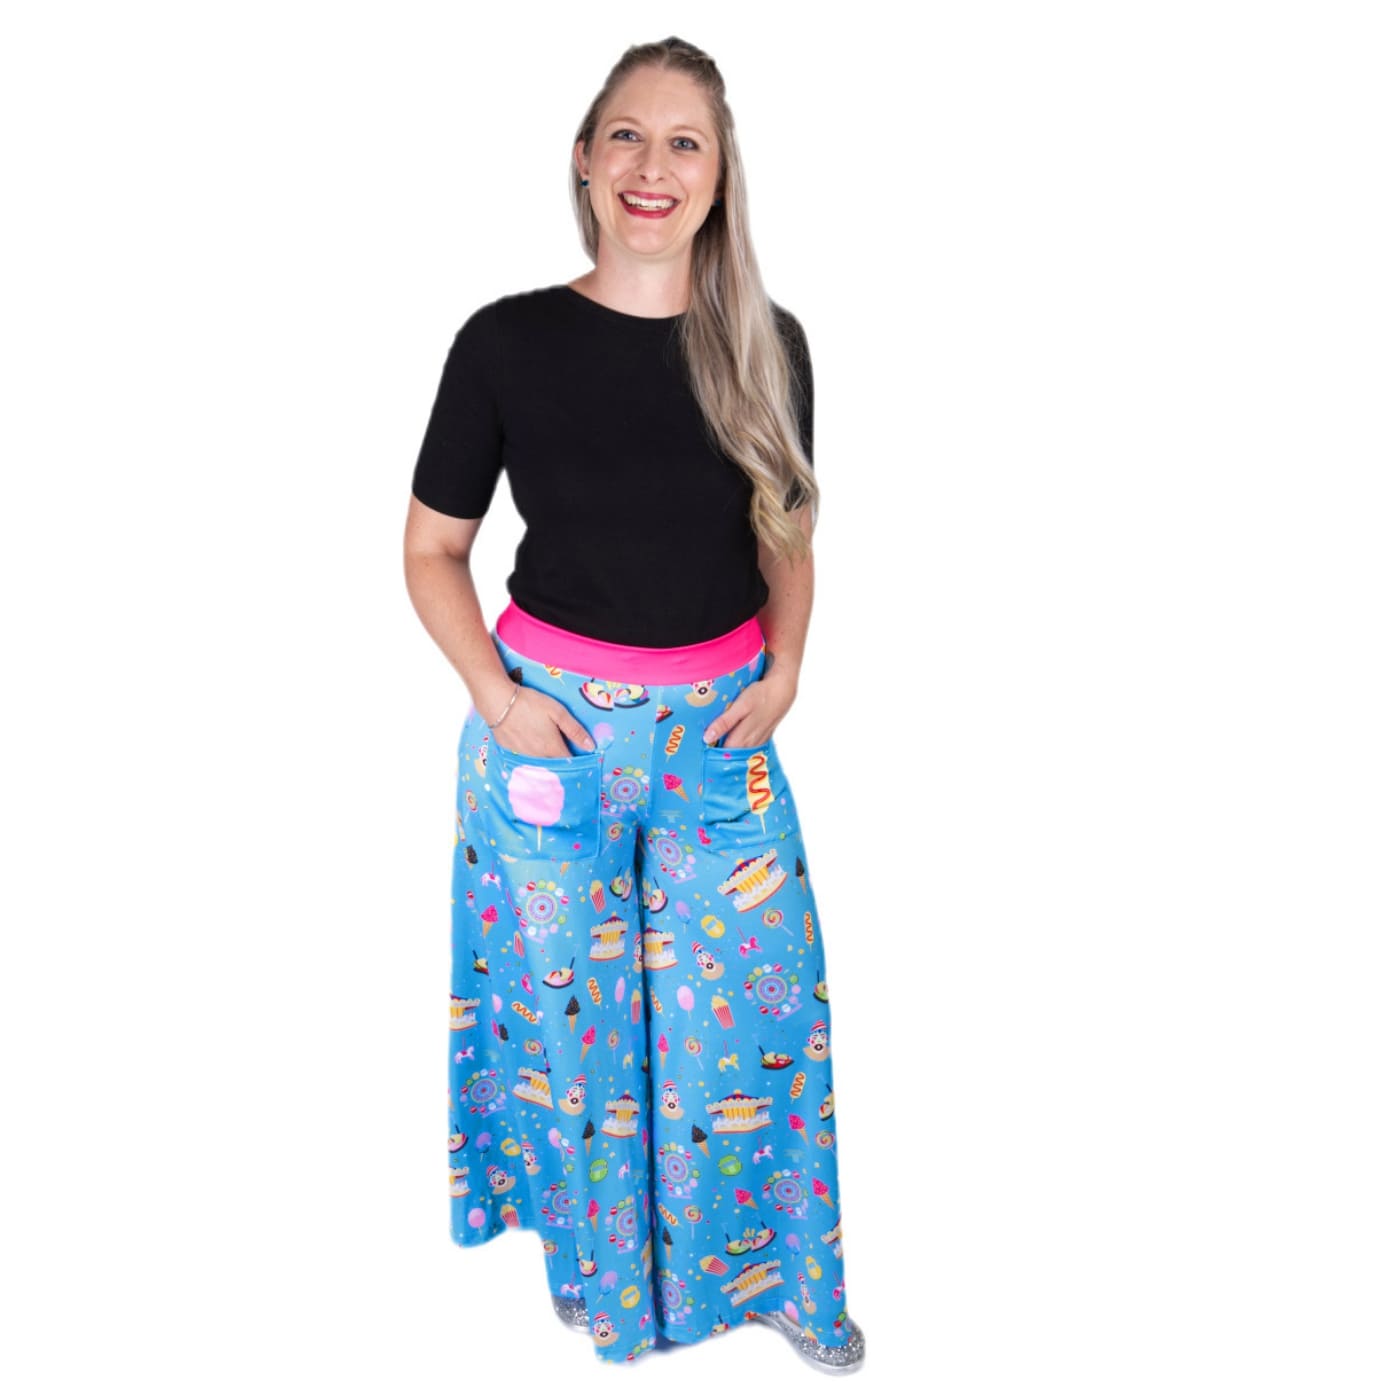 Day At The Fair Wide Leg Pants by RainbowsAndFairies.com.au (Carnival - Carousel - Ferris Wheel - Pants With Pockets - Vintage Inspired - Flares) - SKU: CL_WIDEL_DAYFA_ORG - Pic-05